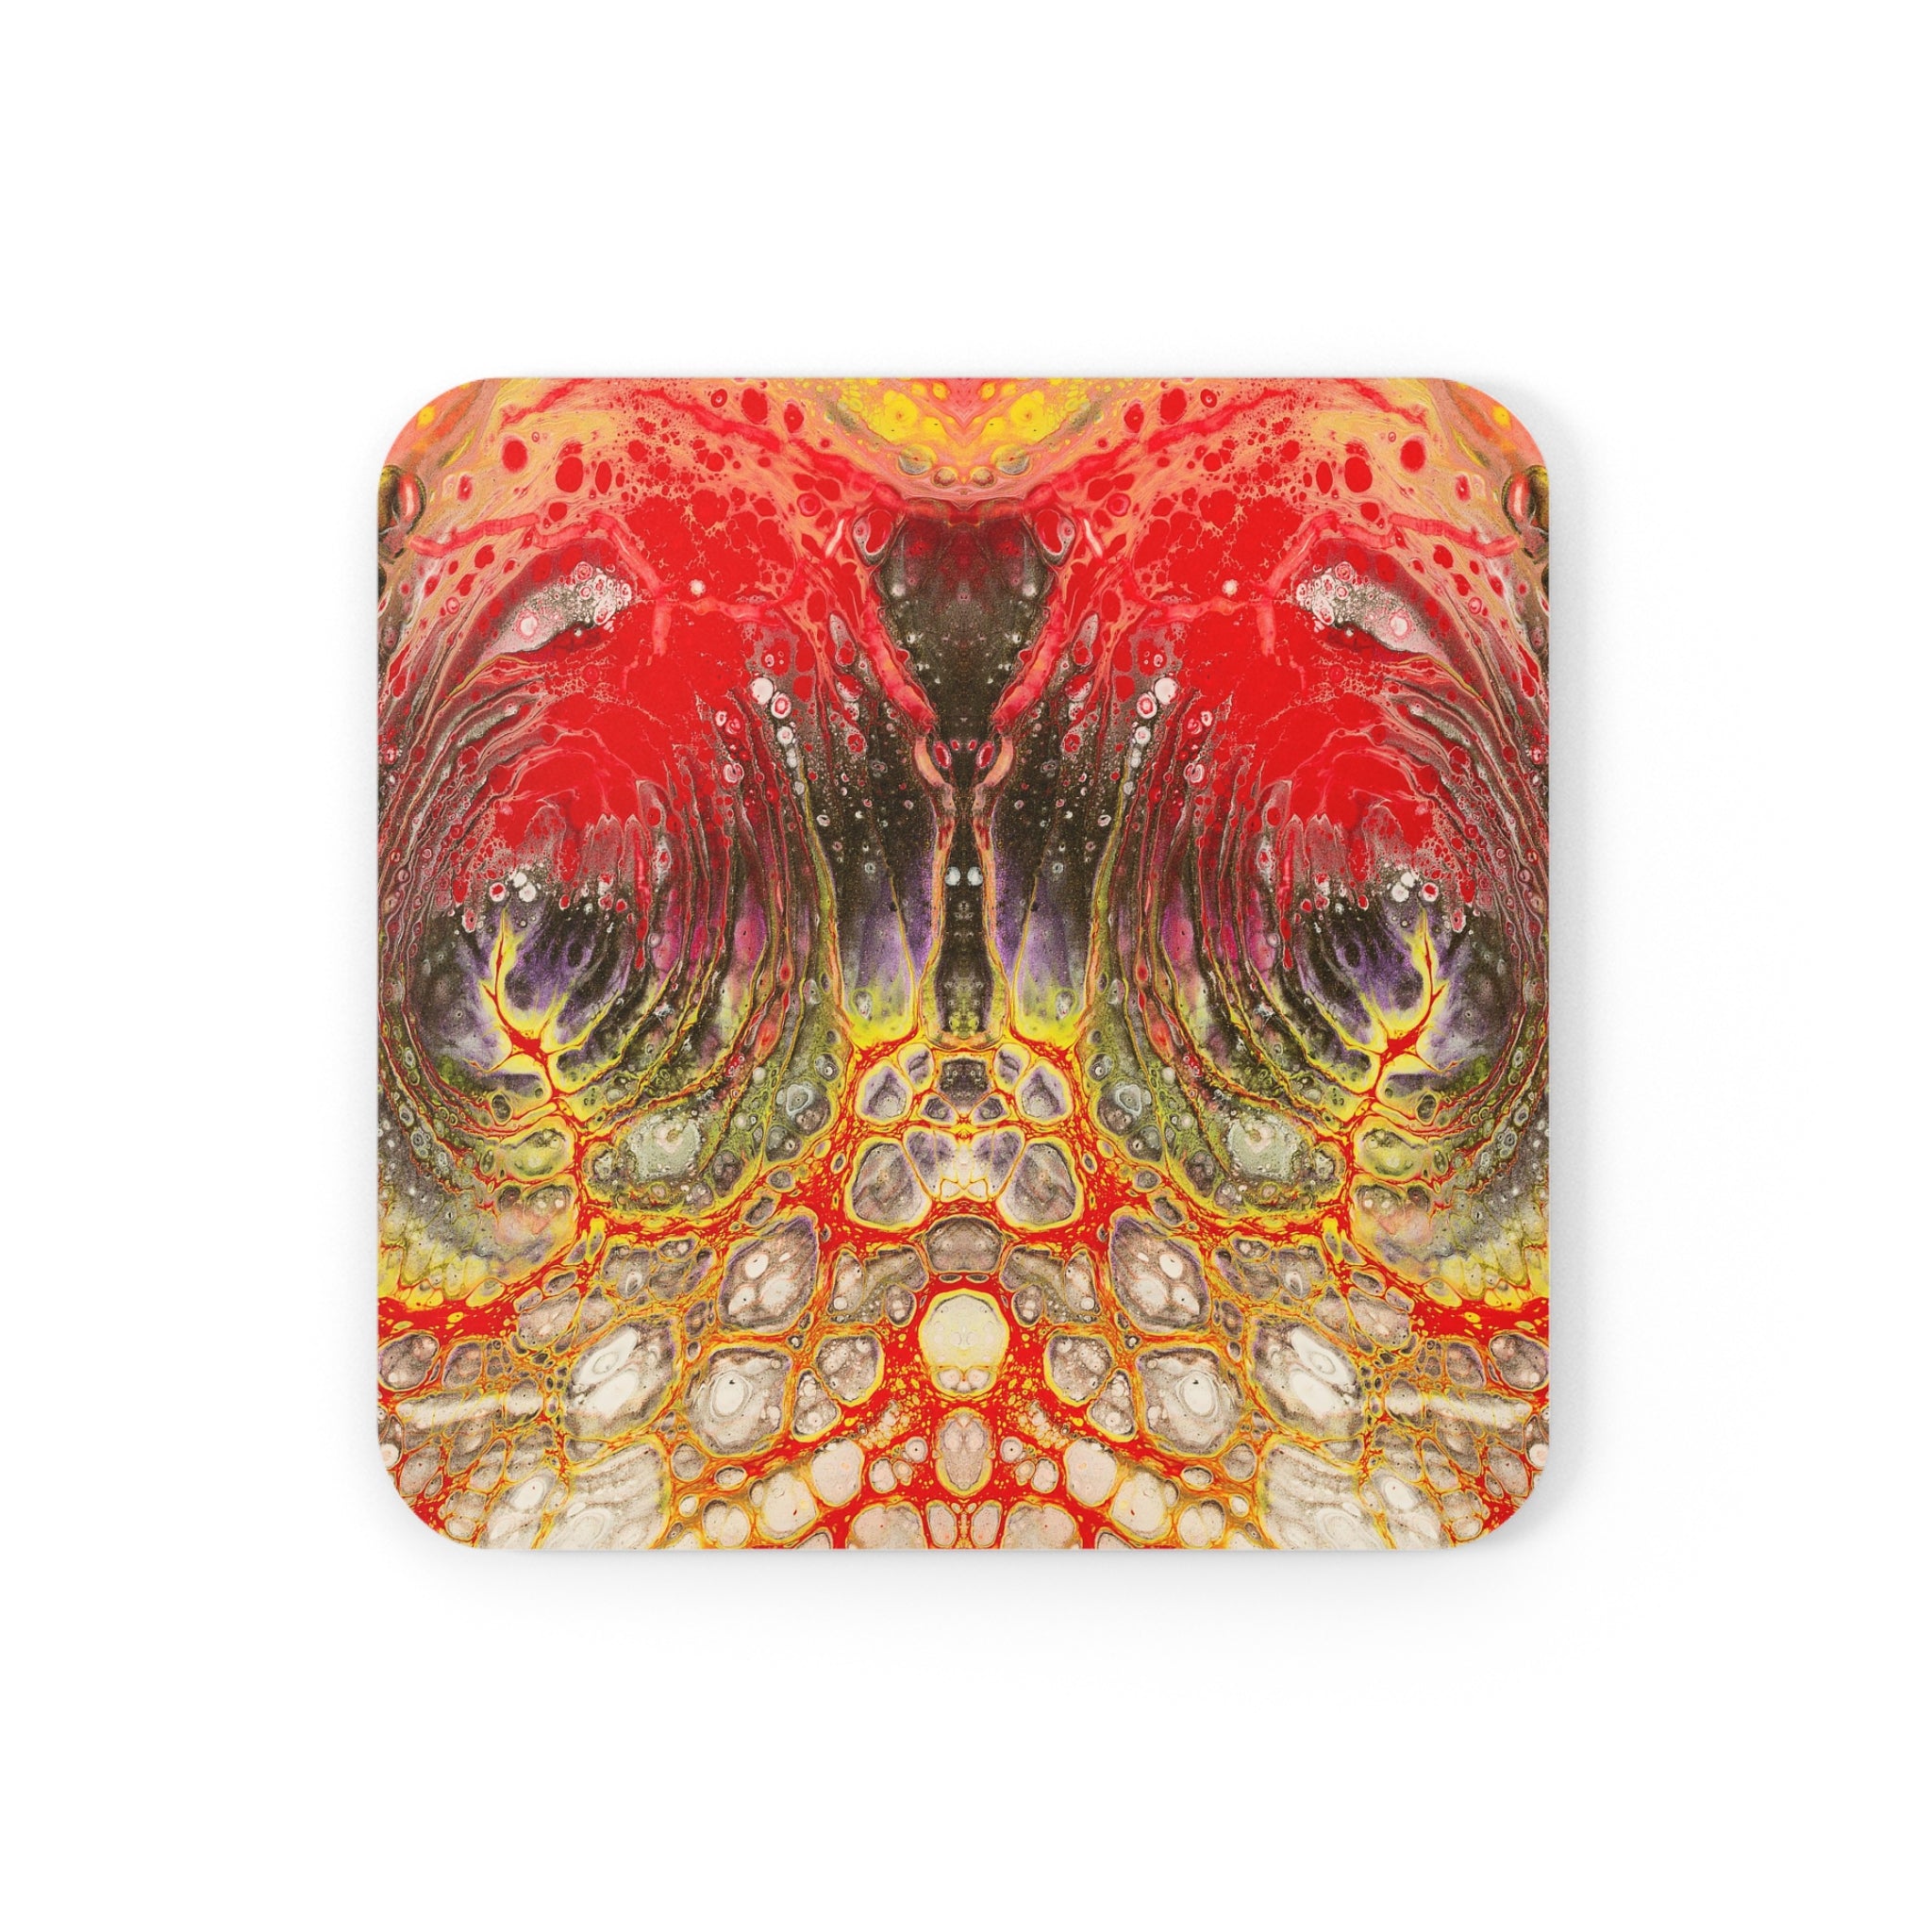 Cameron Creations - Galaxious Utopious - Stylish Coffee Coaster - Square Front